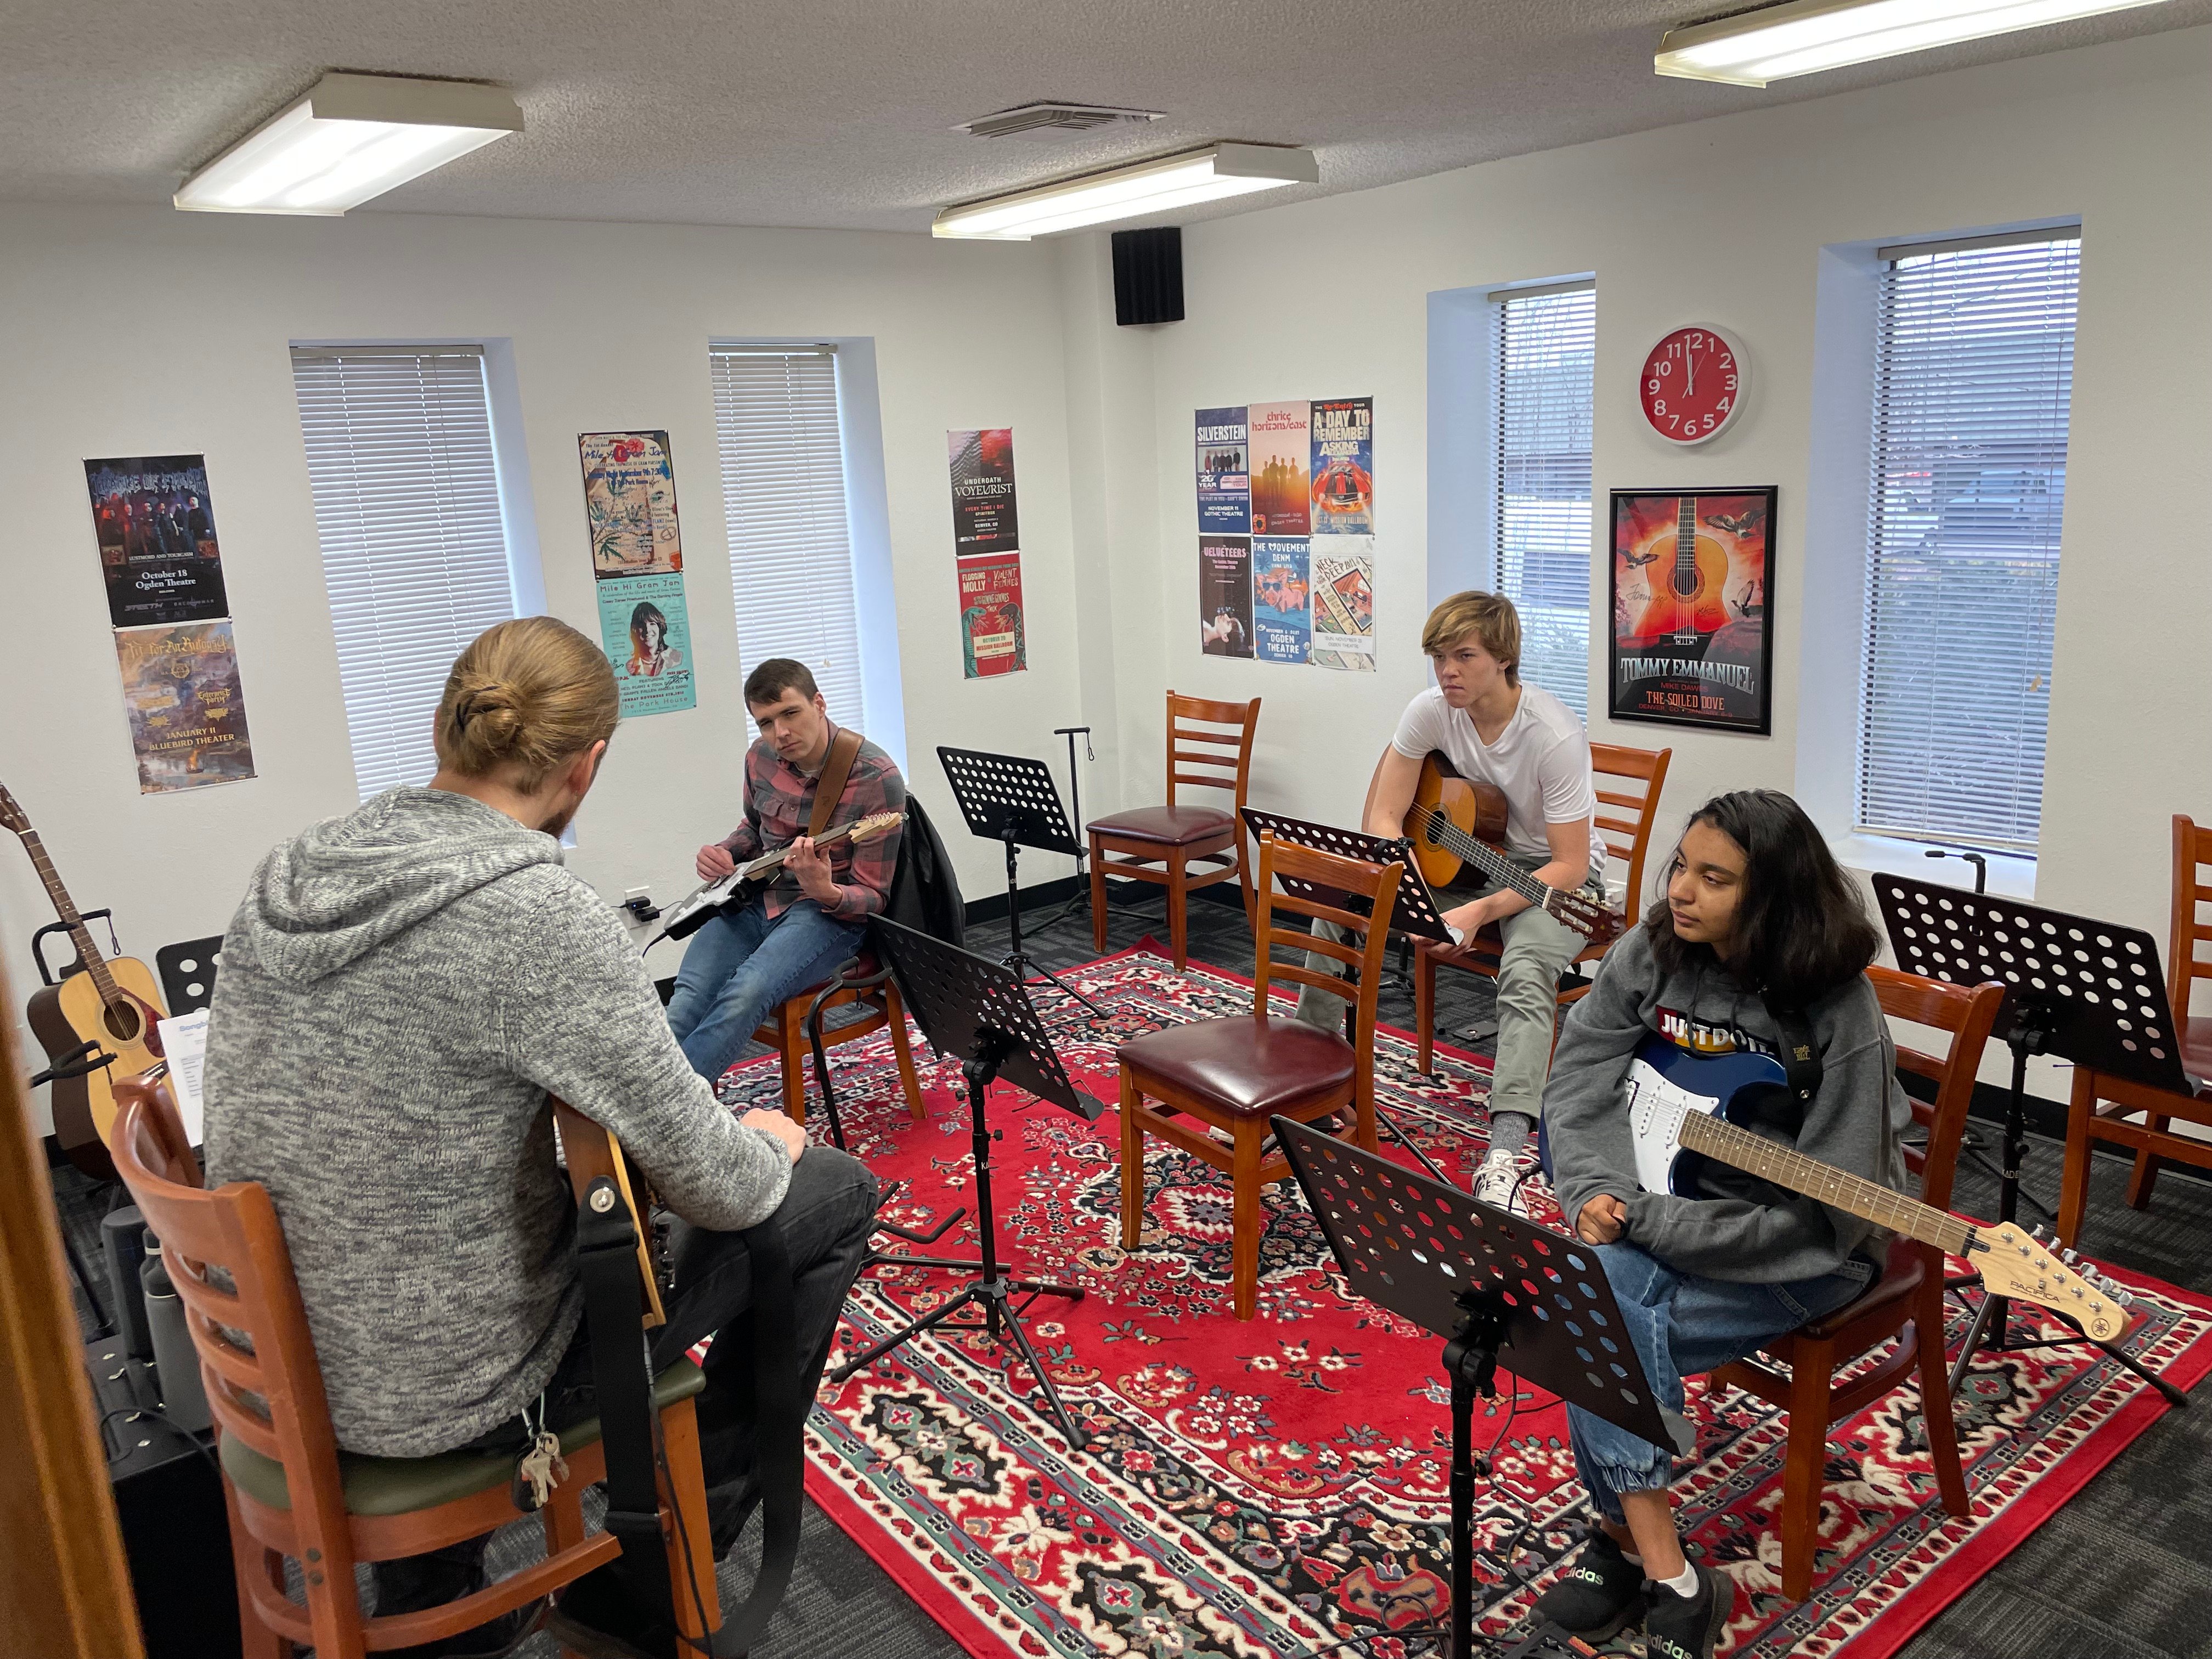 A class with teenagers taking guitar lessons